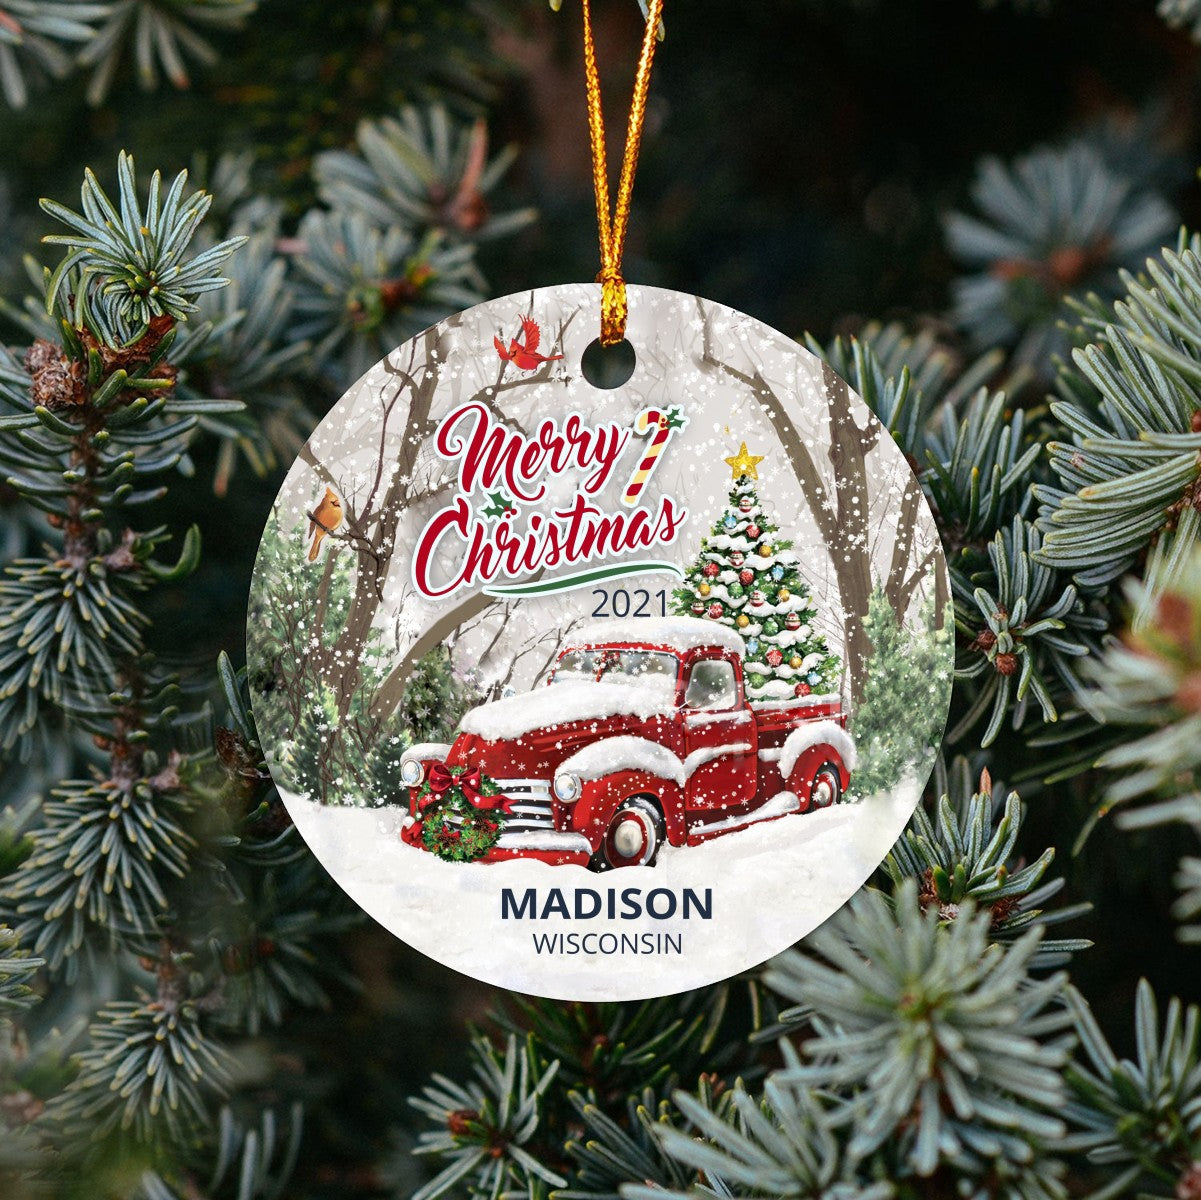 Christmas Tree Ornaments Madison - Ornament Customize With Name City And State Madison Wisconsin WI - Red Truck Xmas Ornaments 3'' Plastic Gift For Family, Friend And Housewarming